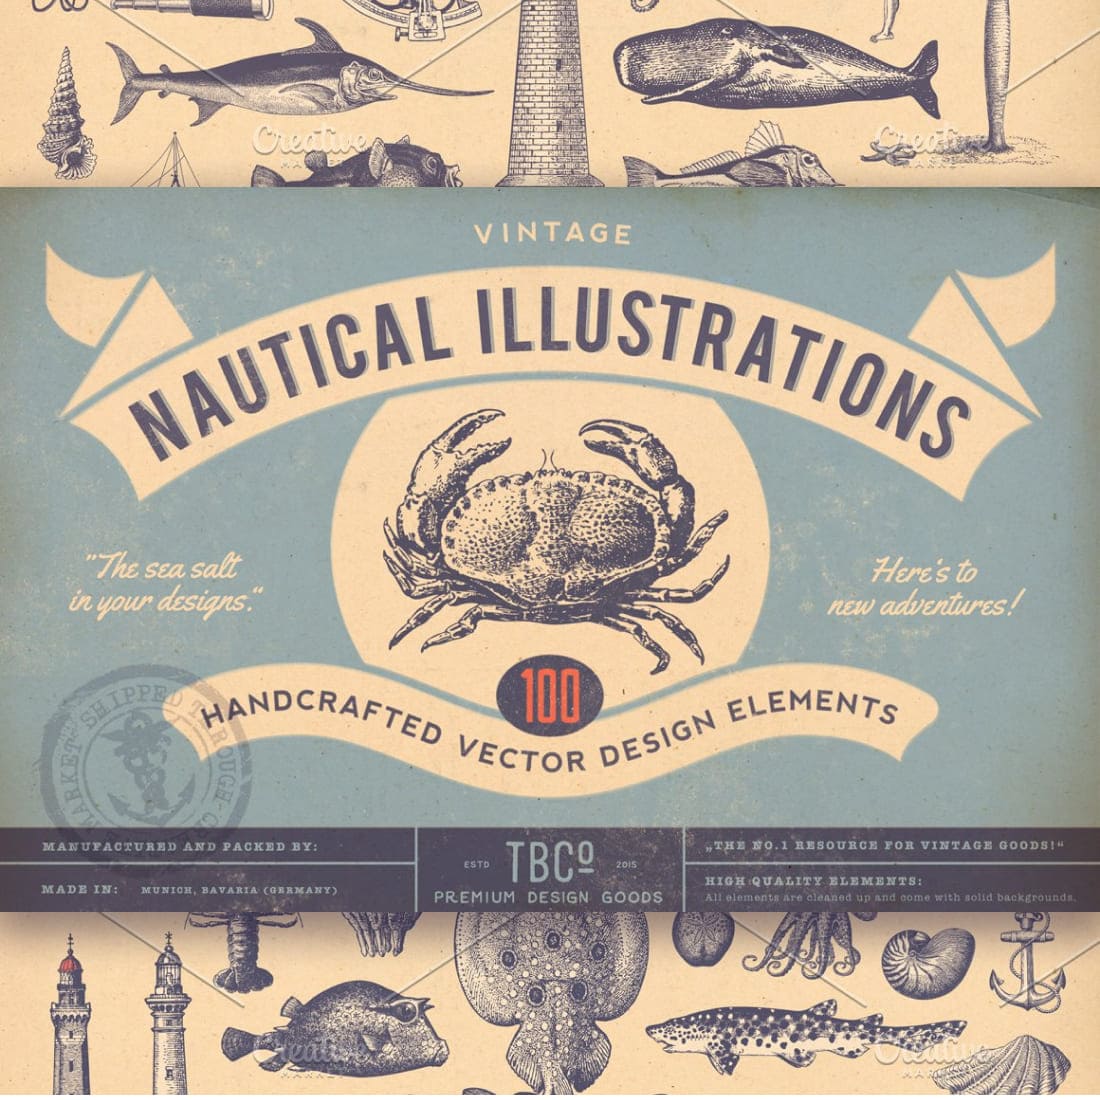 100 Vintage Nautical Illustrations cover image.